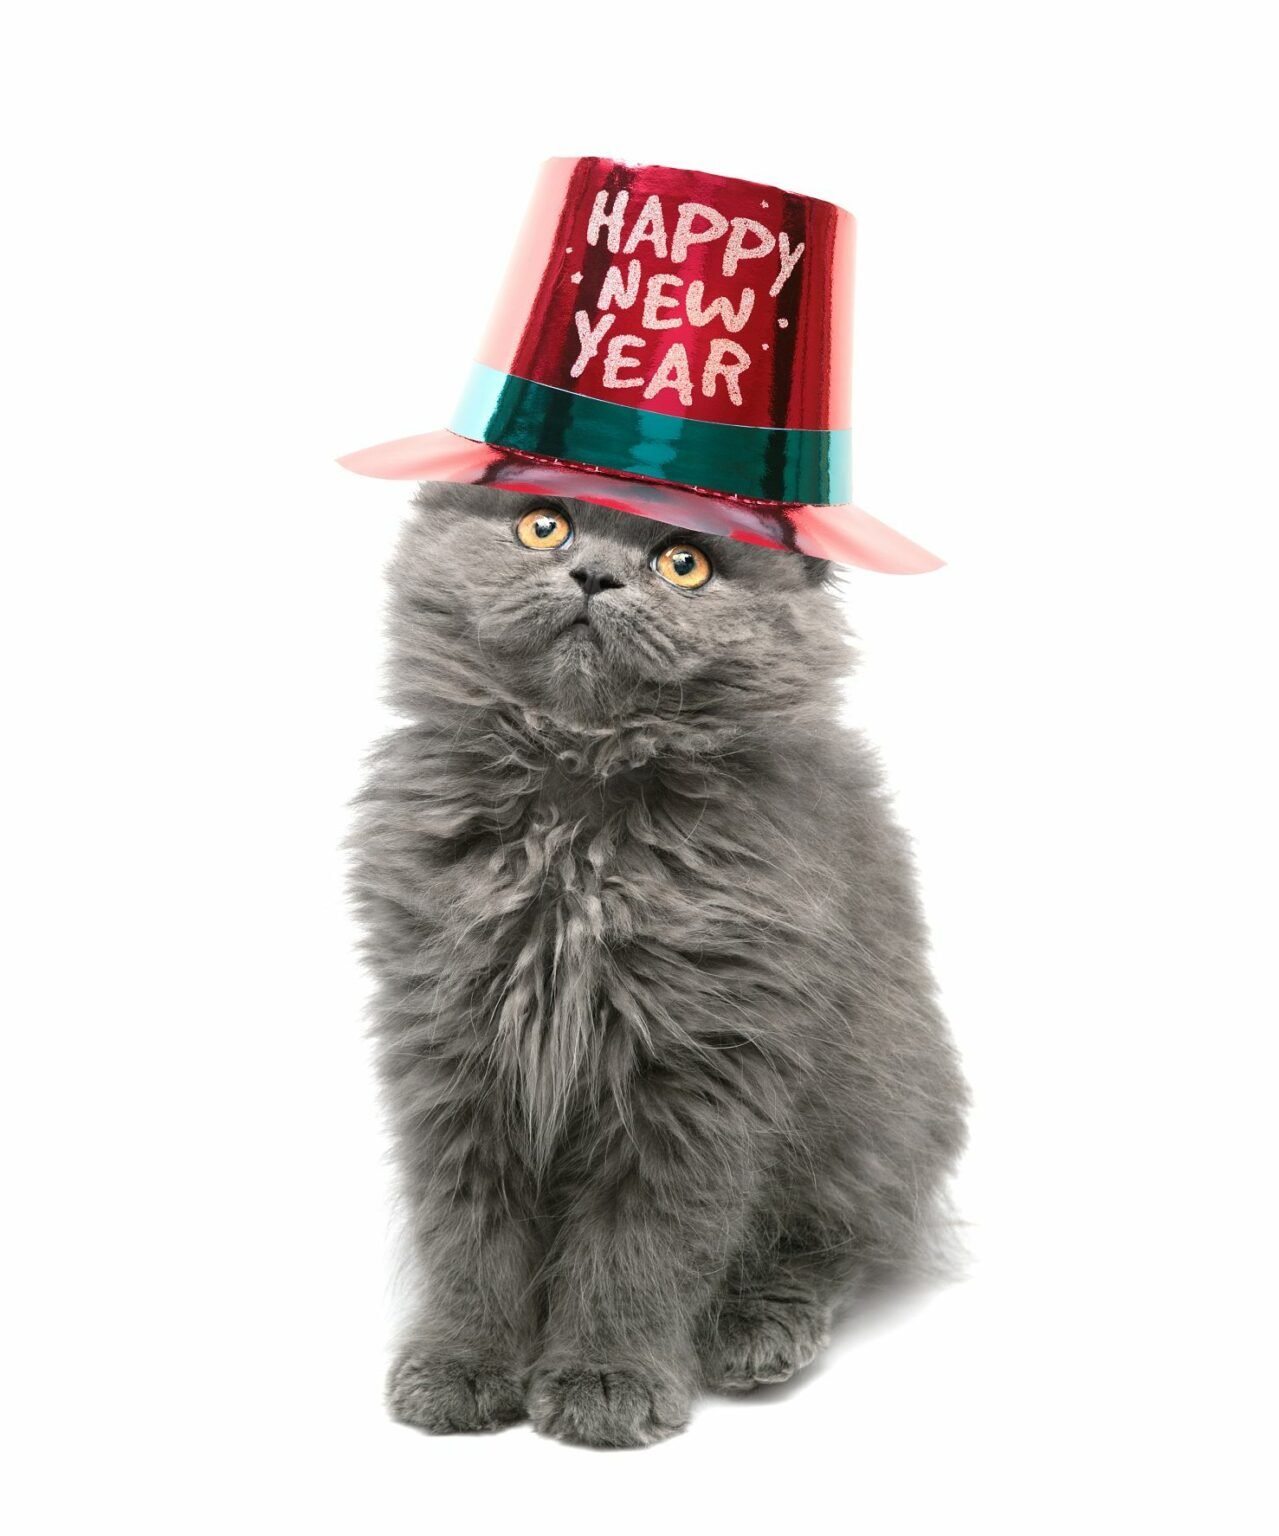 80 Happy New Year Cat Images, GIFs and Memes (2025) iPhone2Lovely